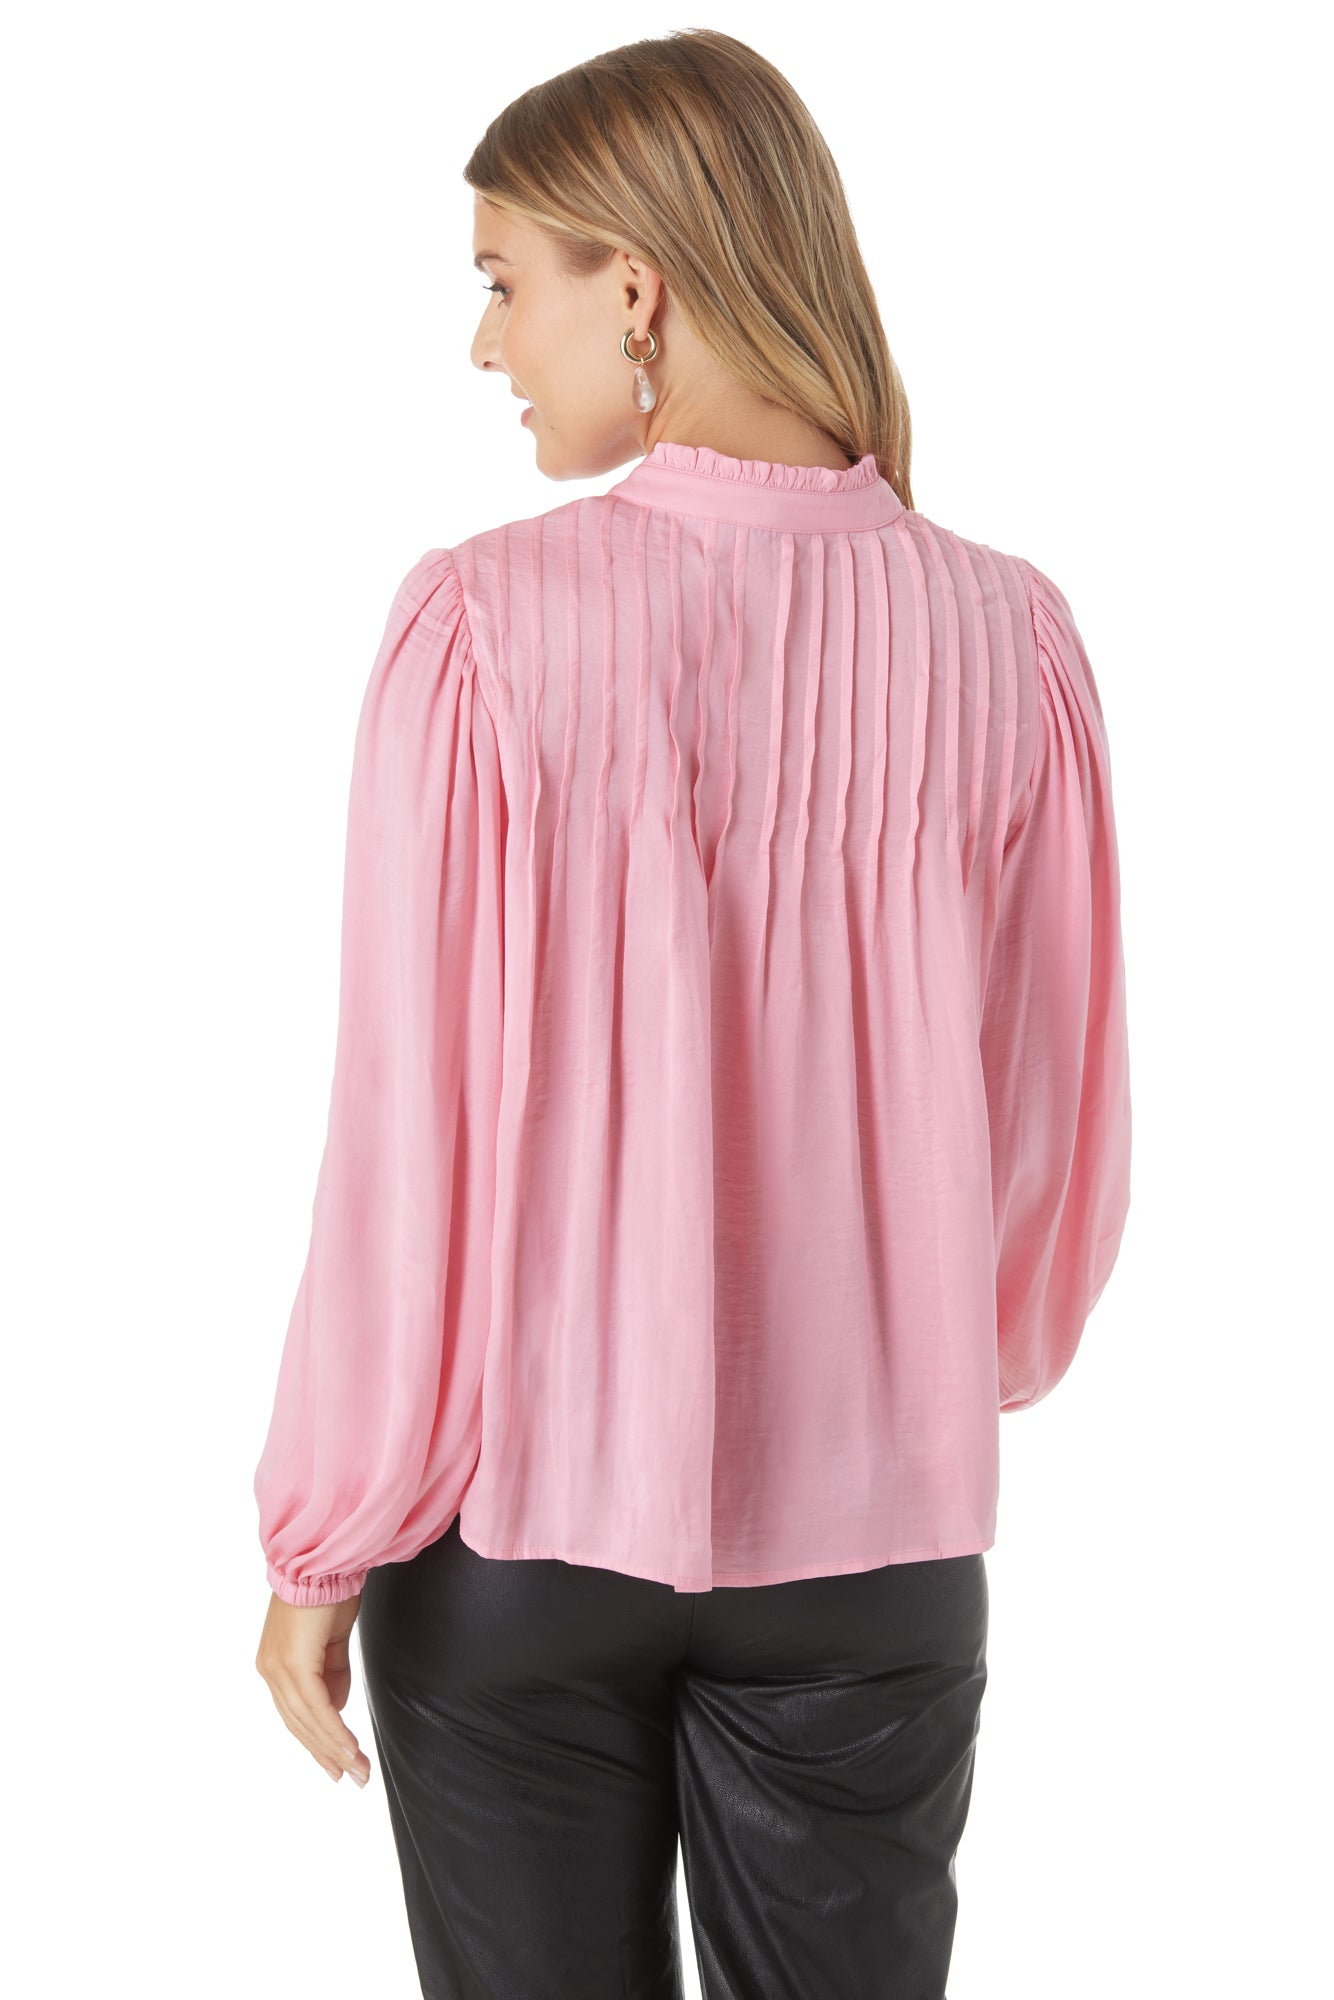 Gabby Blouse in Ballet | CROSBY by Mollie Burch